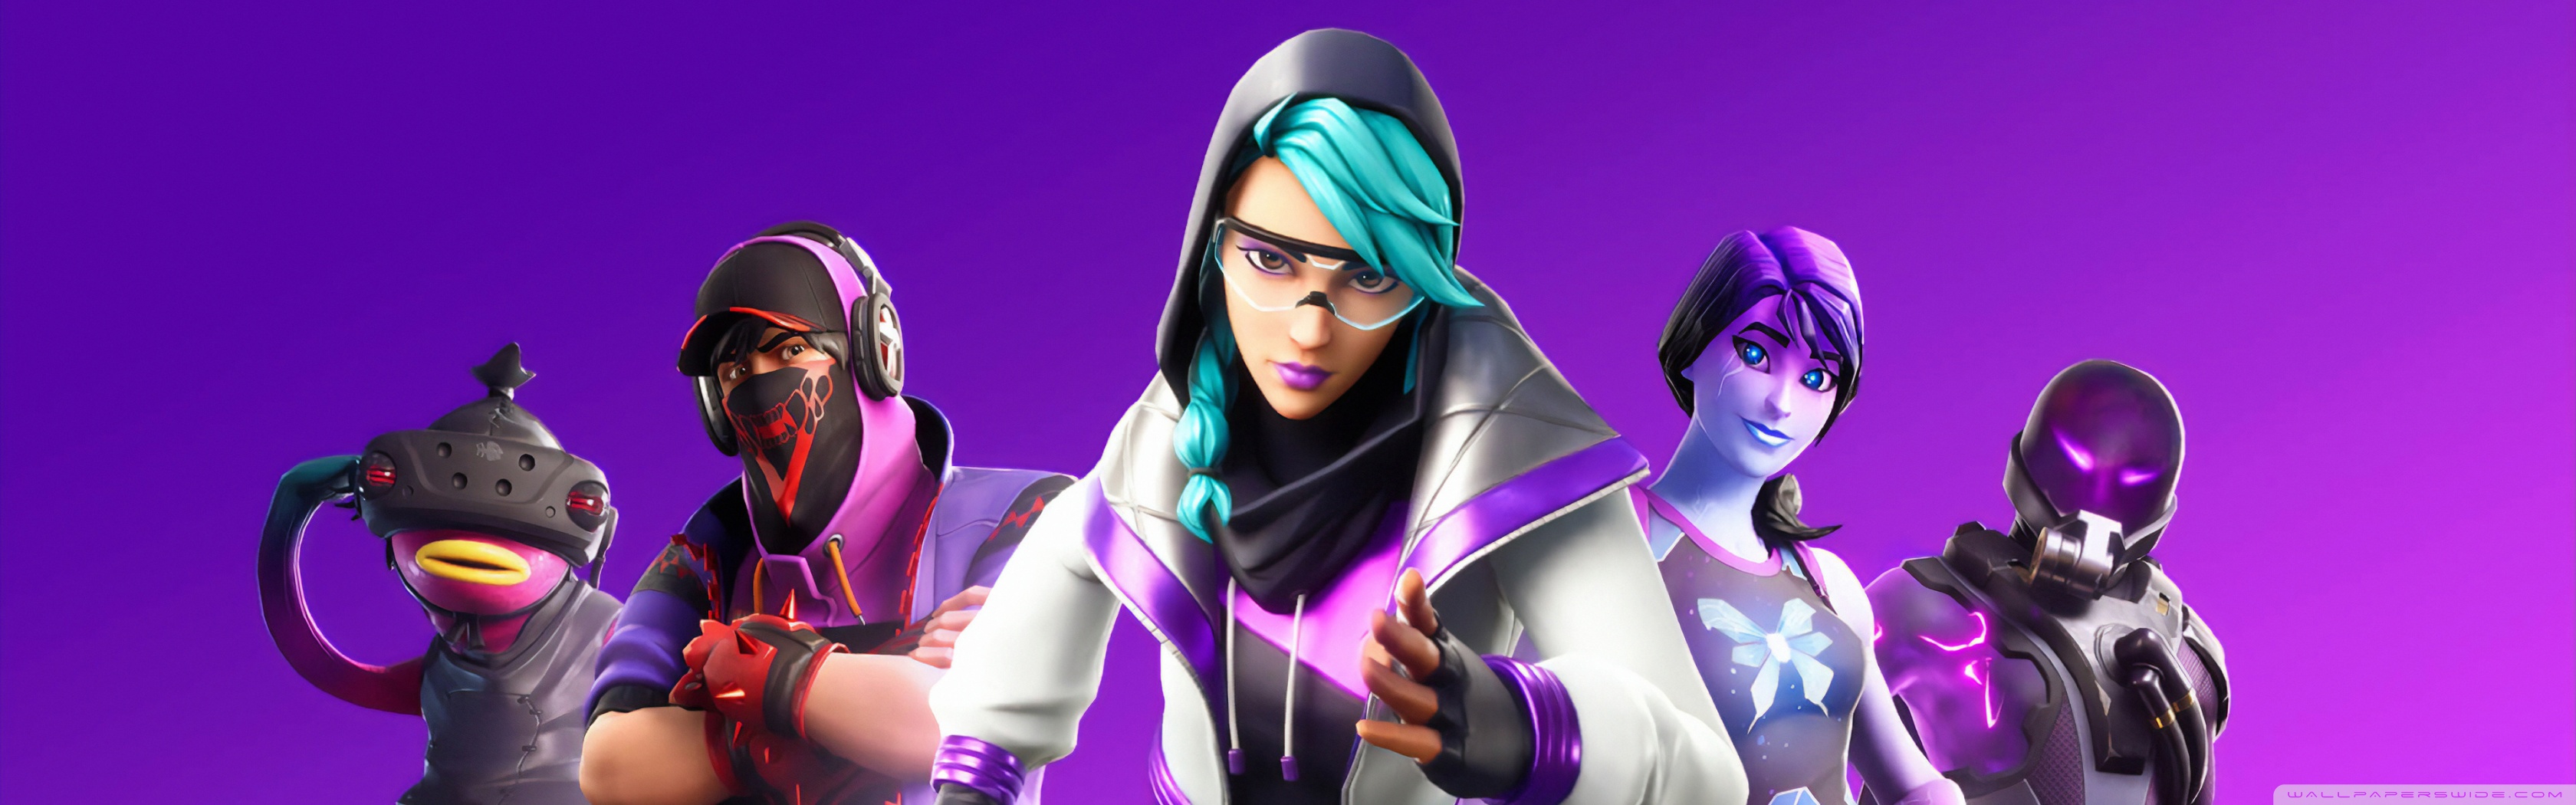 Top 11 Cool Fortnite Wallpapers [HD and 4K] for PC